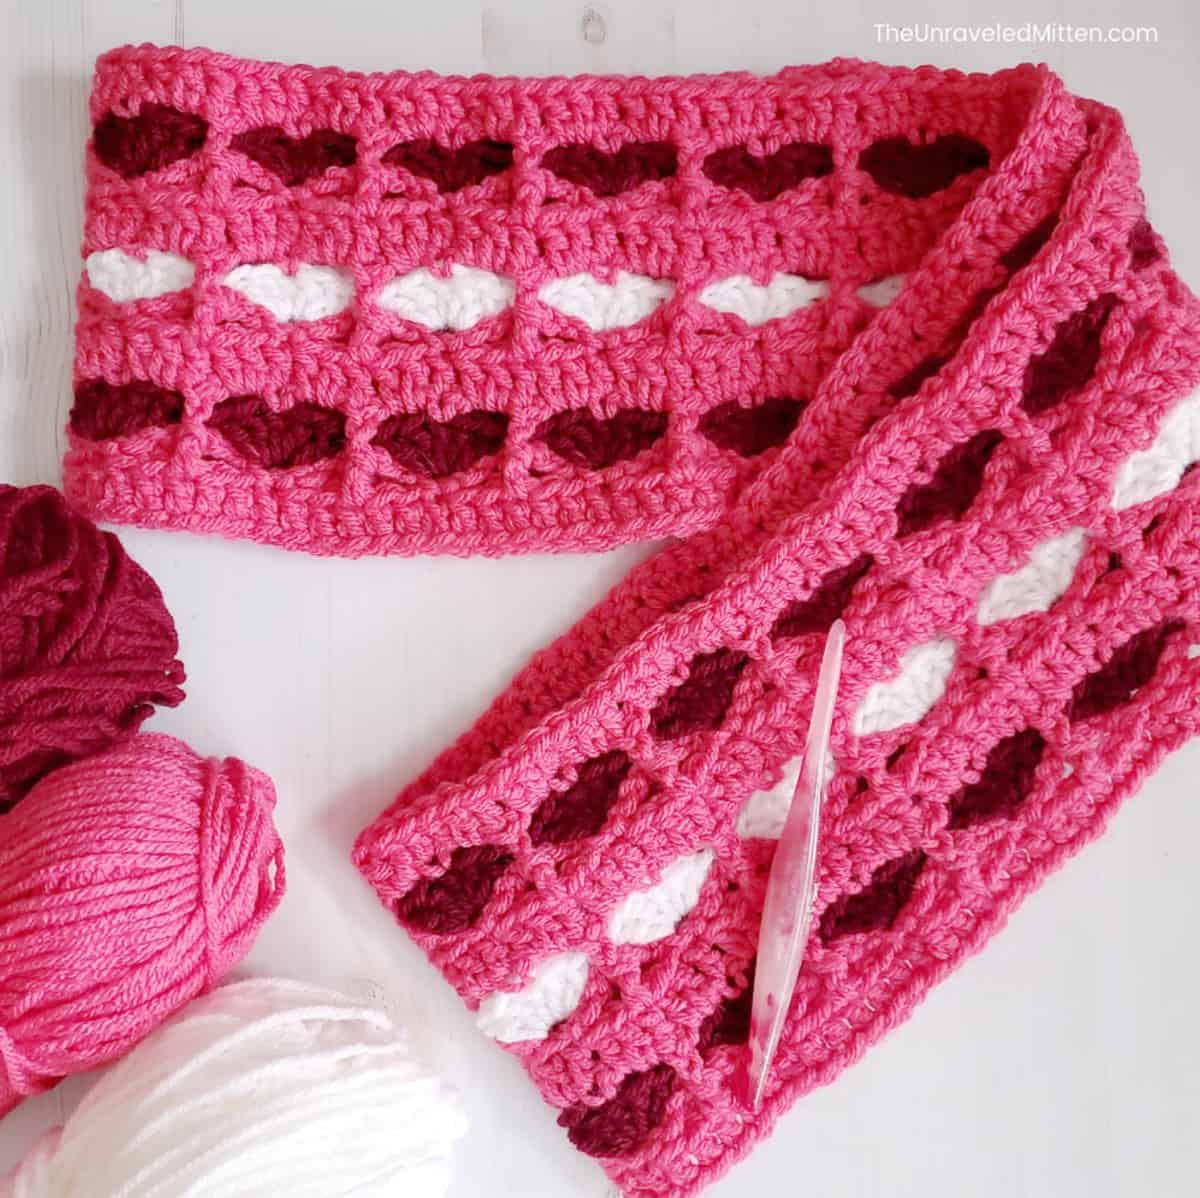 Bubblegum pink crochet infinity scarf with red and white hearts stitched in.